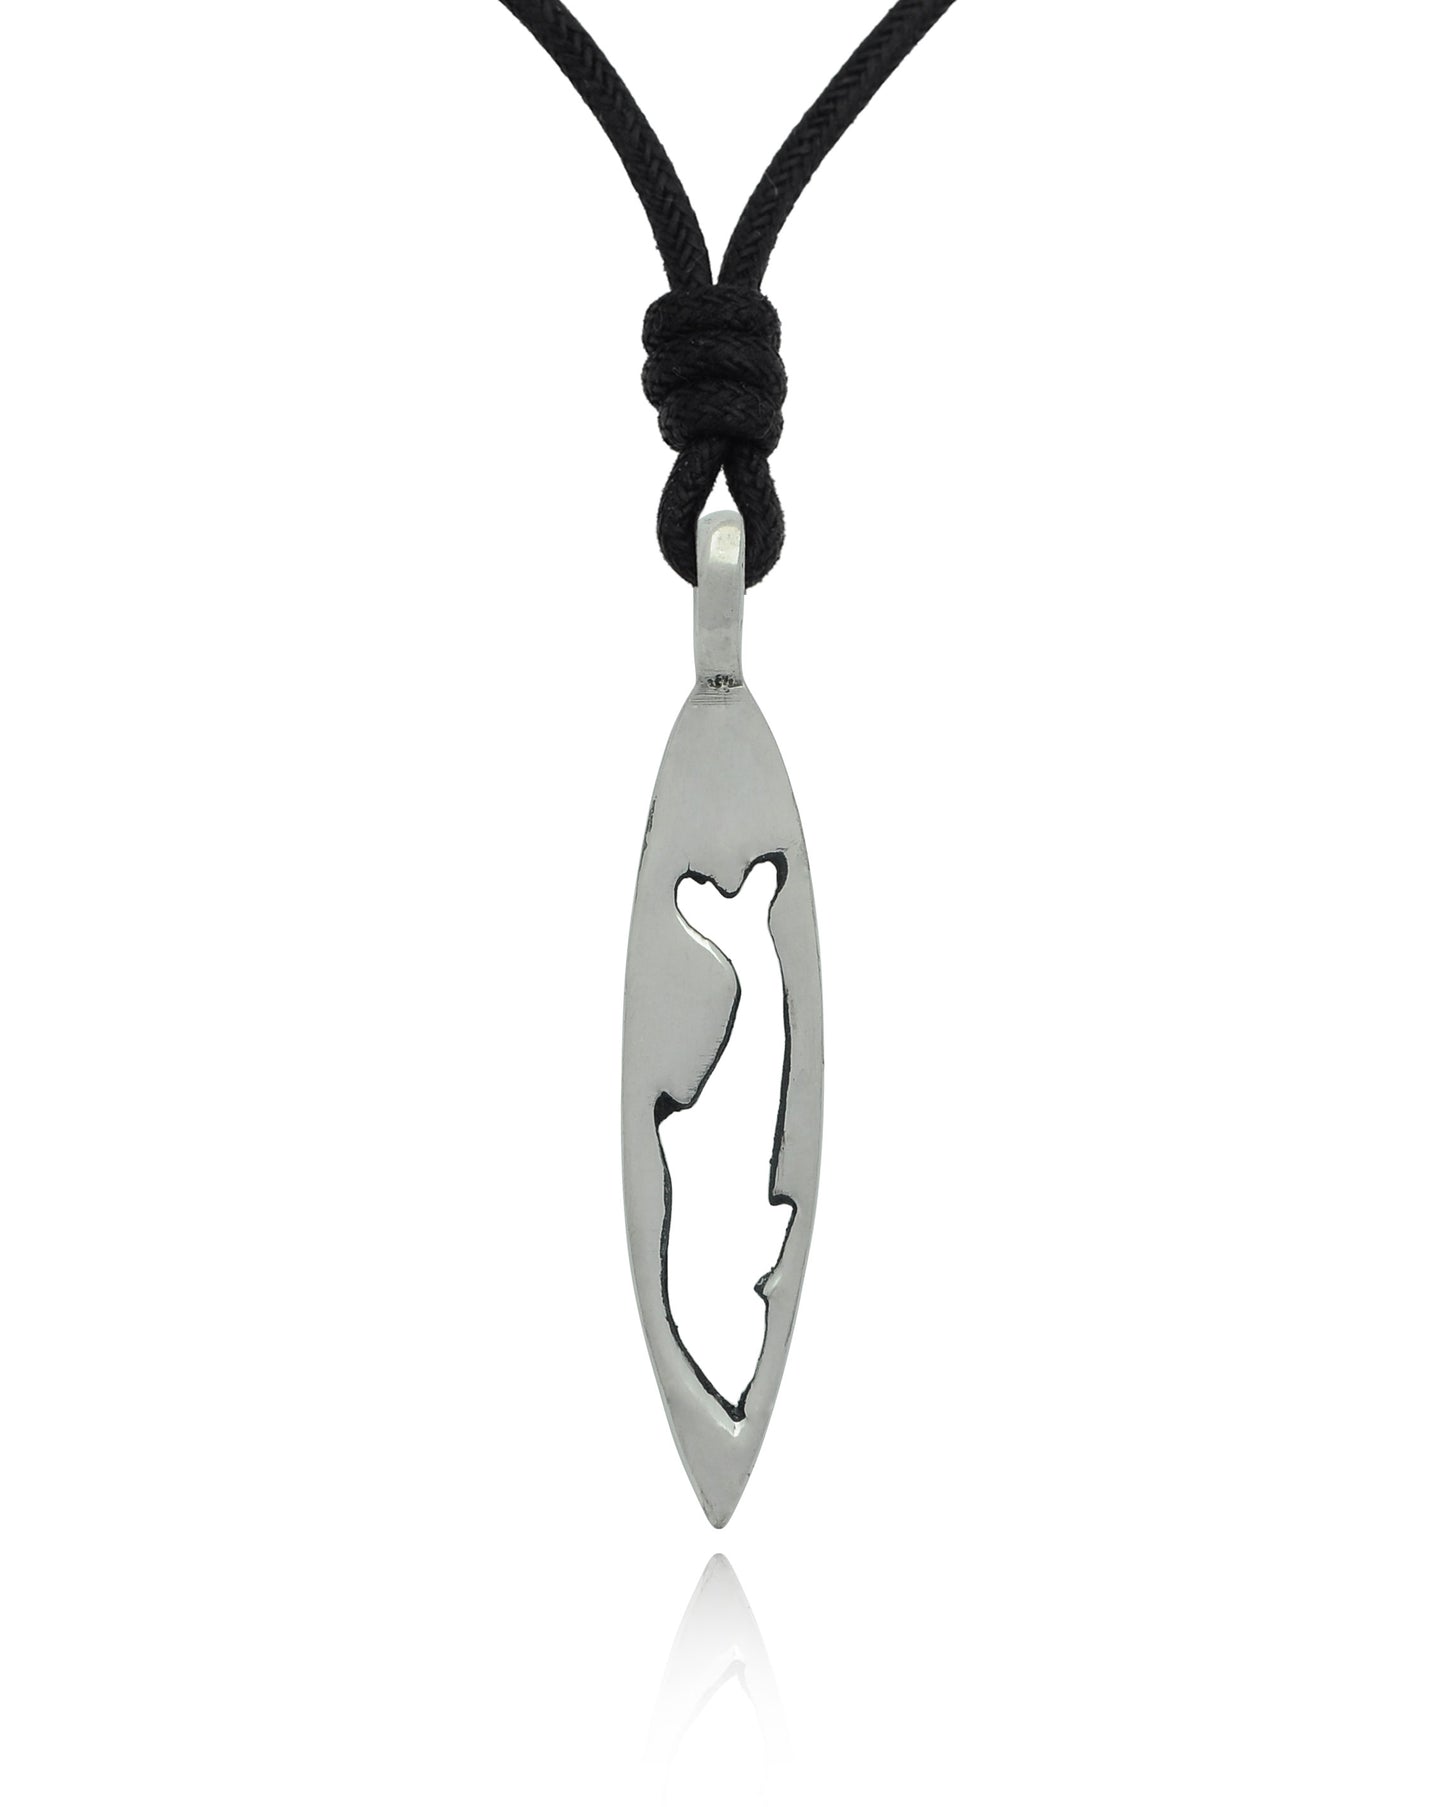 Dolphin Surfboard Silver Pewter Charm Necklace Pendant Jewelry